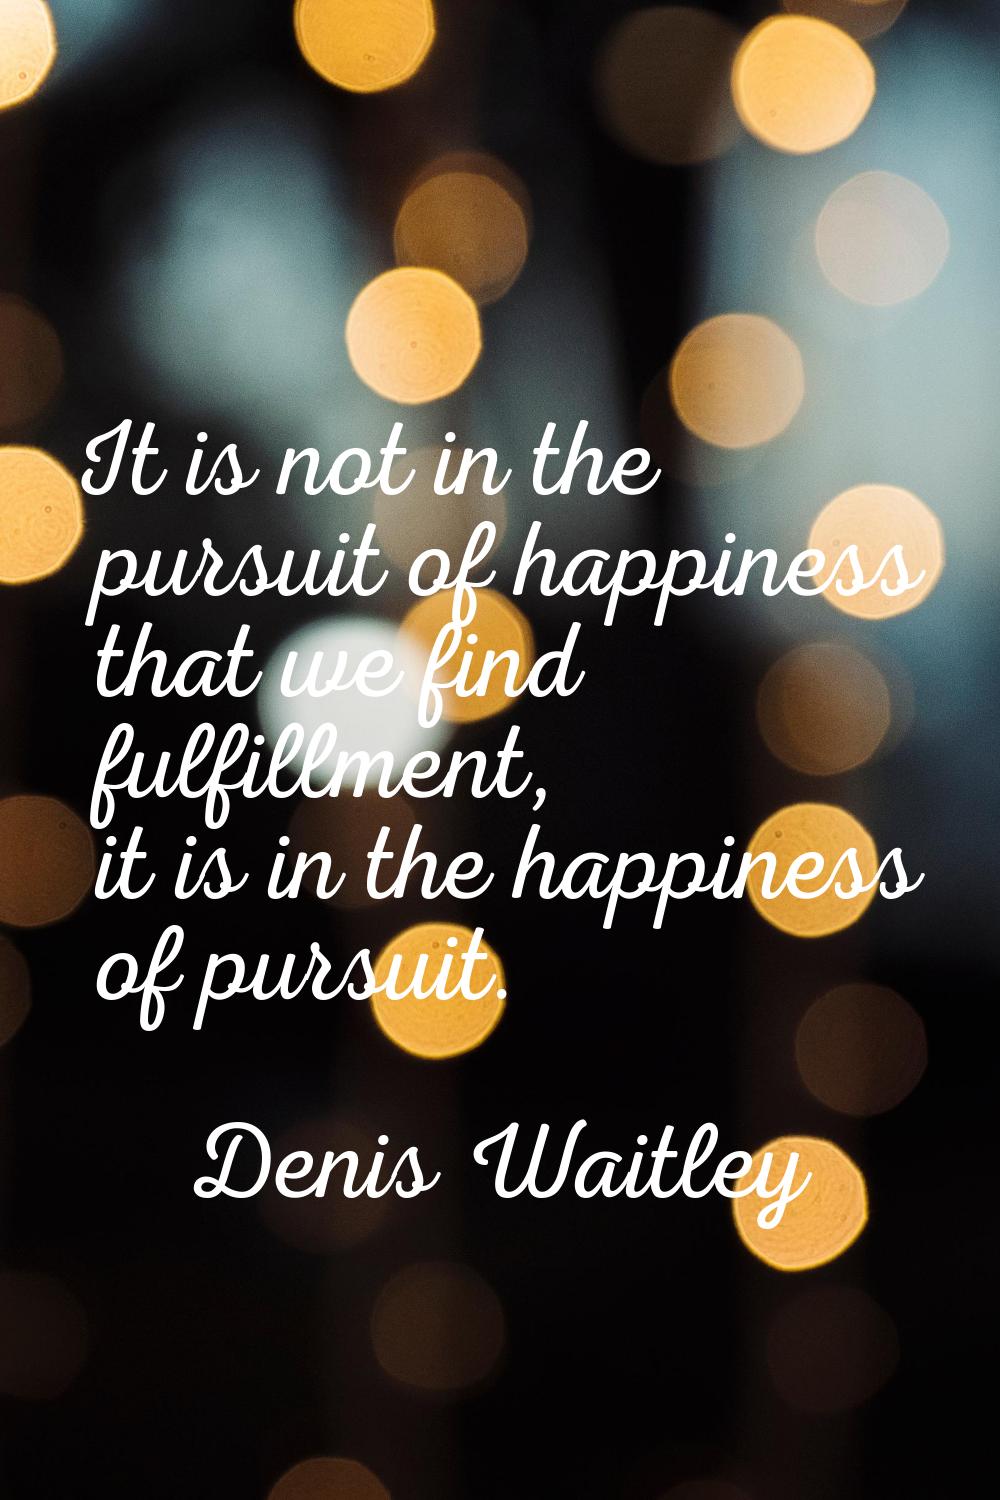 It is not in the pursuit of happiness that we find fulfillment, it is in the happiness of pursuit.